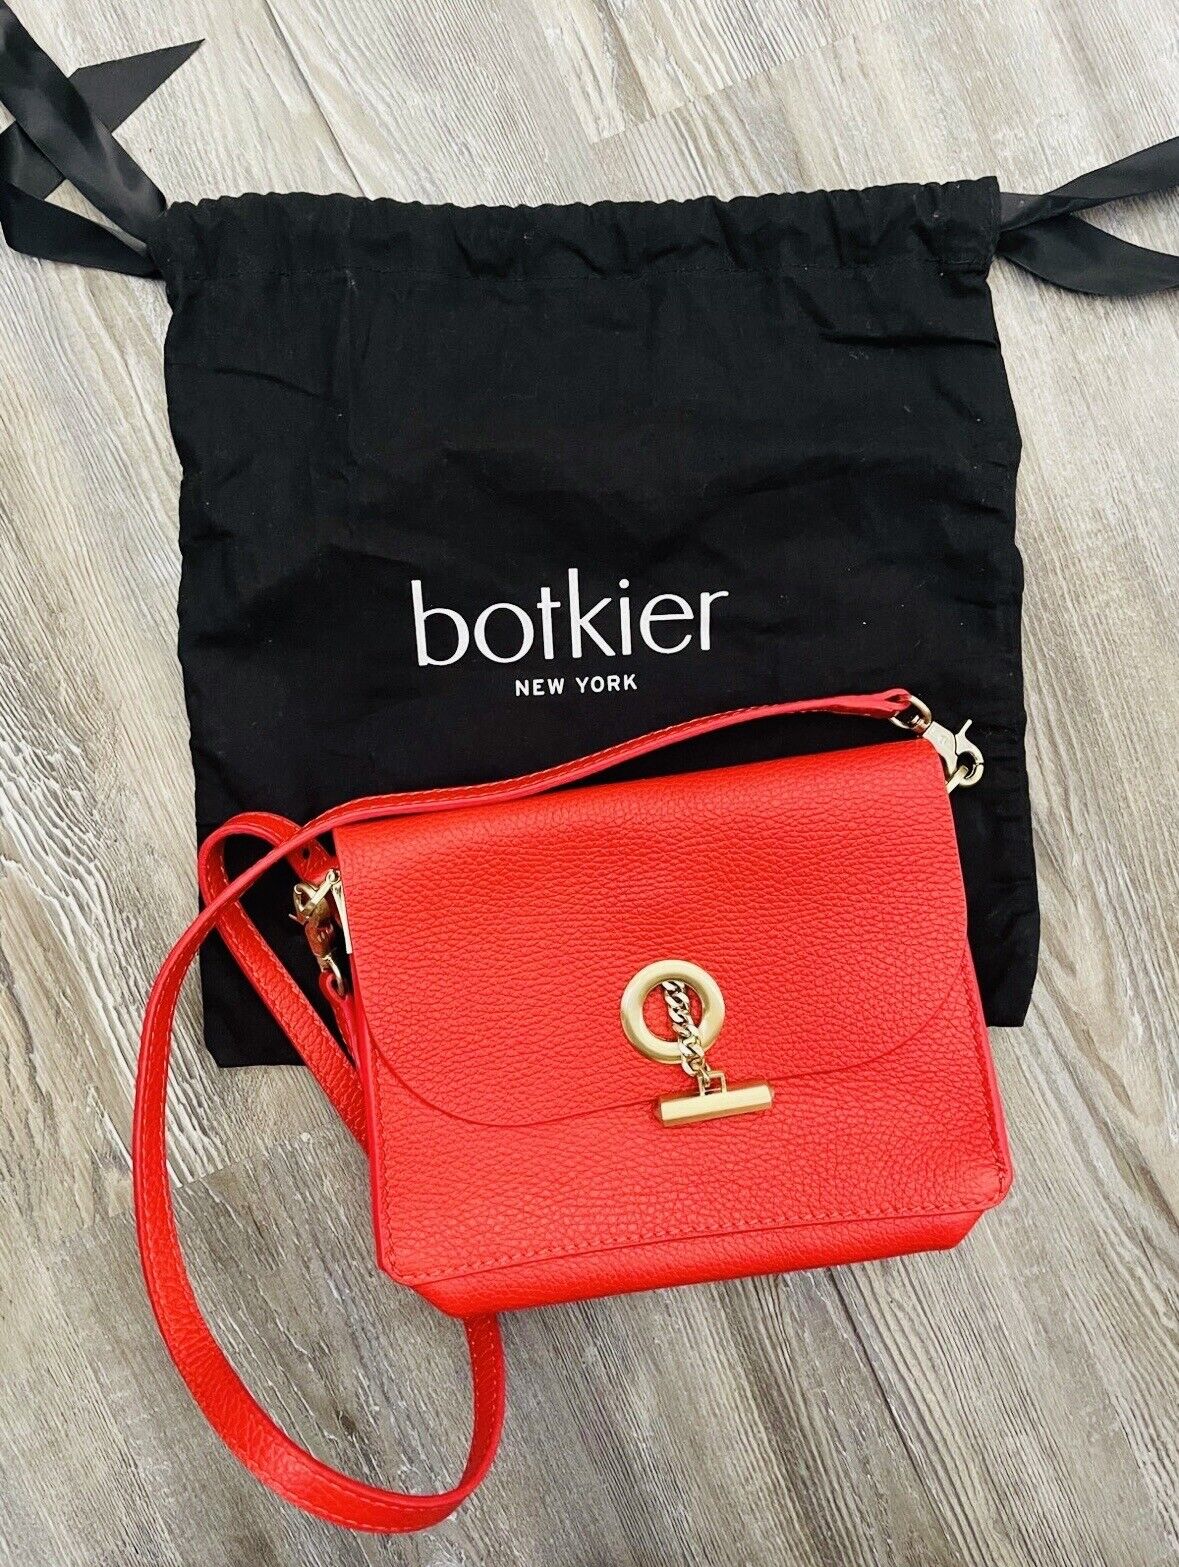 NEW Botkier Red Leather Crossbody Purse